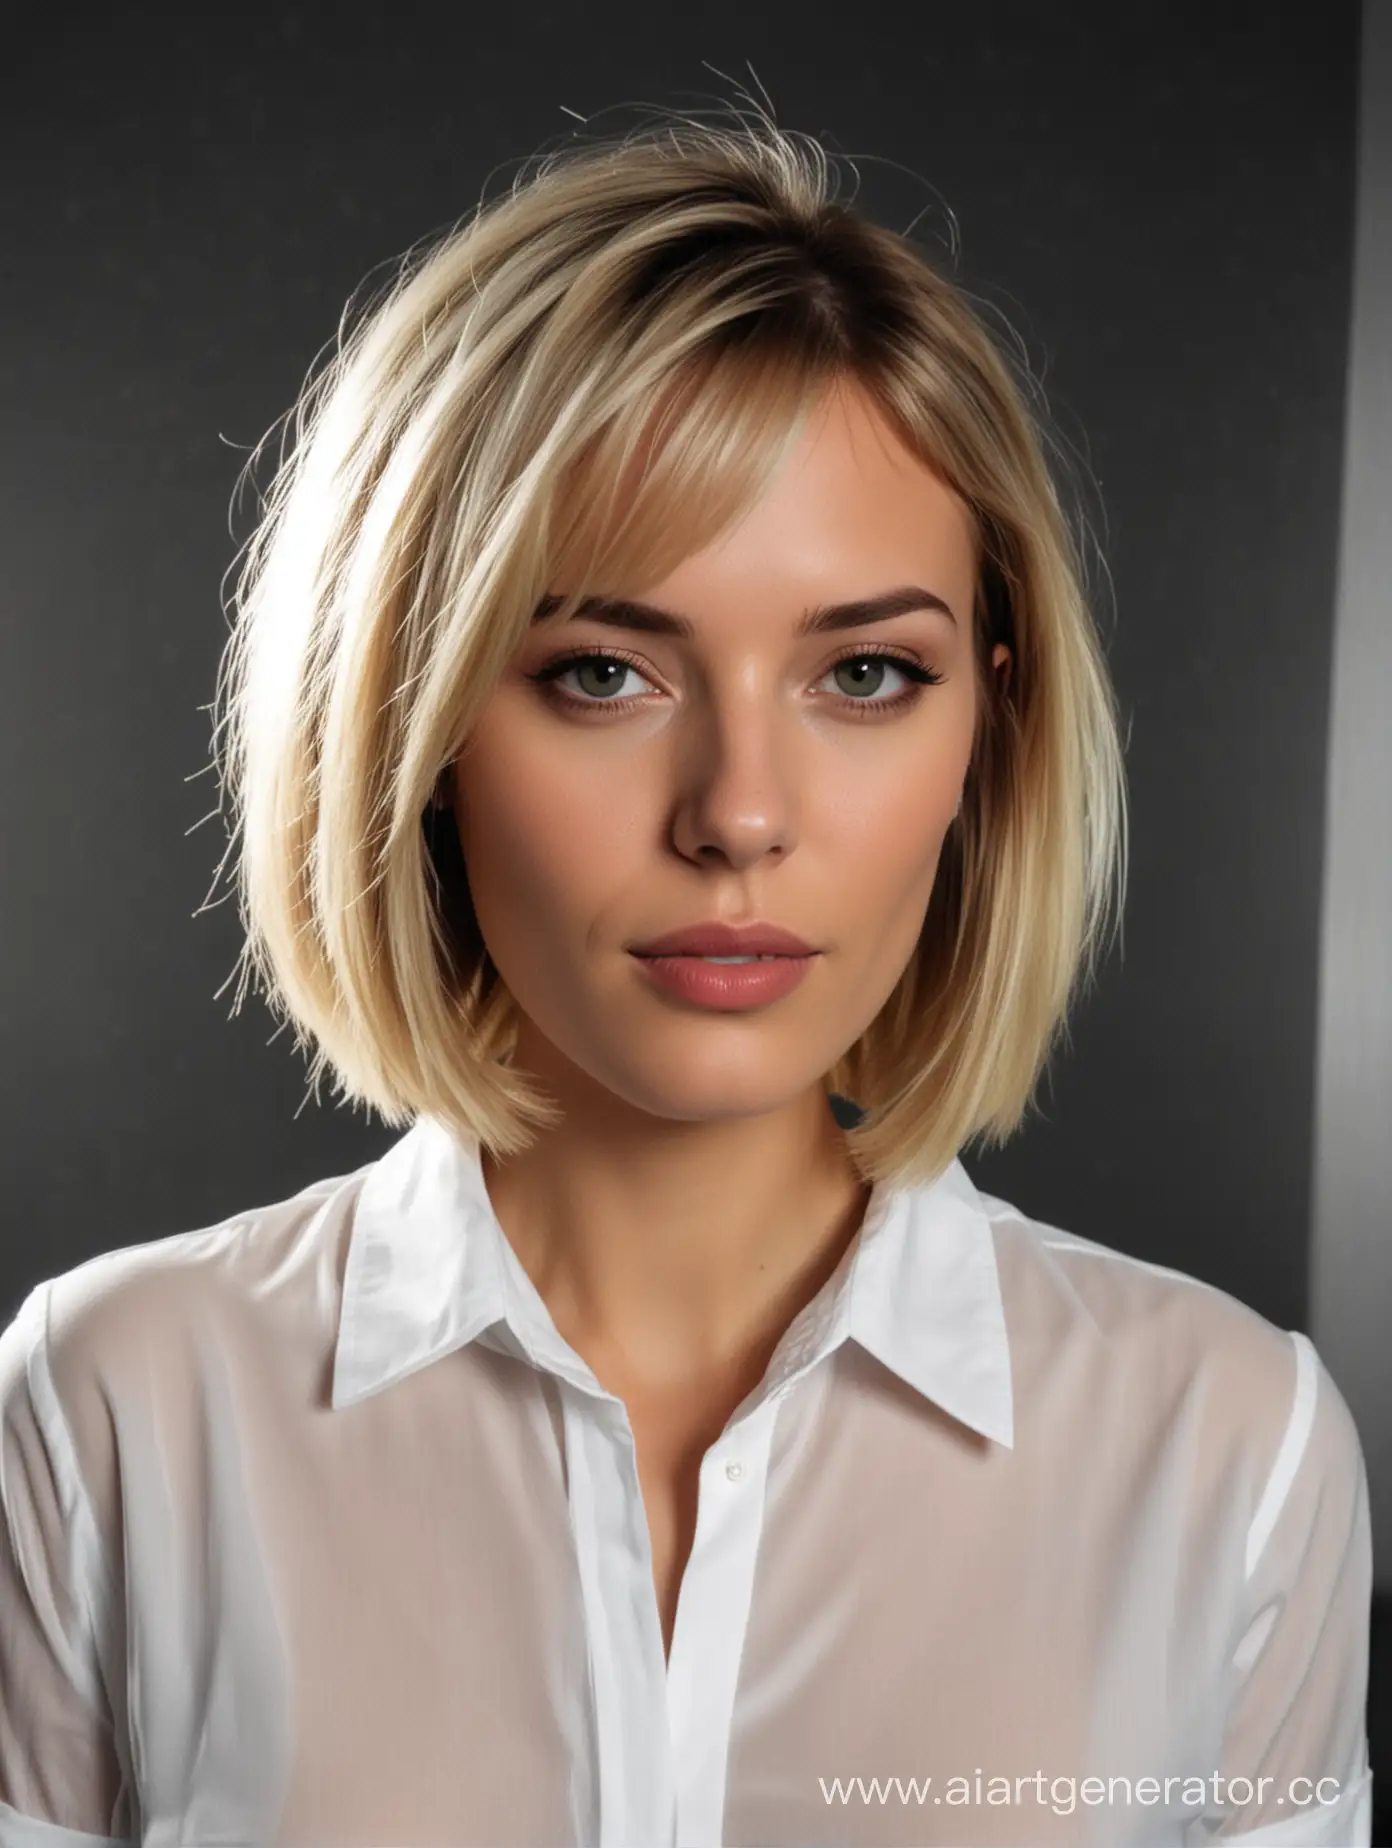 Blonde-Woman-with-Bob-Haircut-in-Minimalist-Black-and-White-Setting